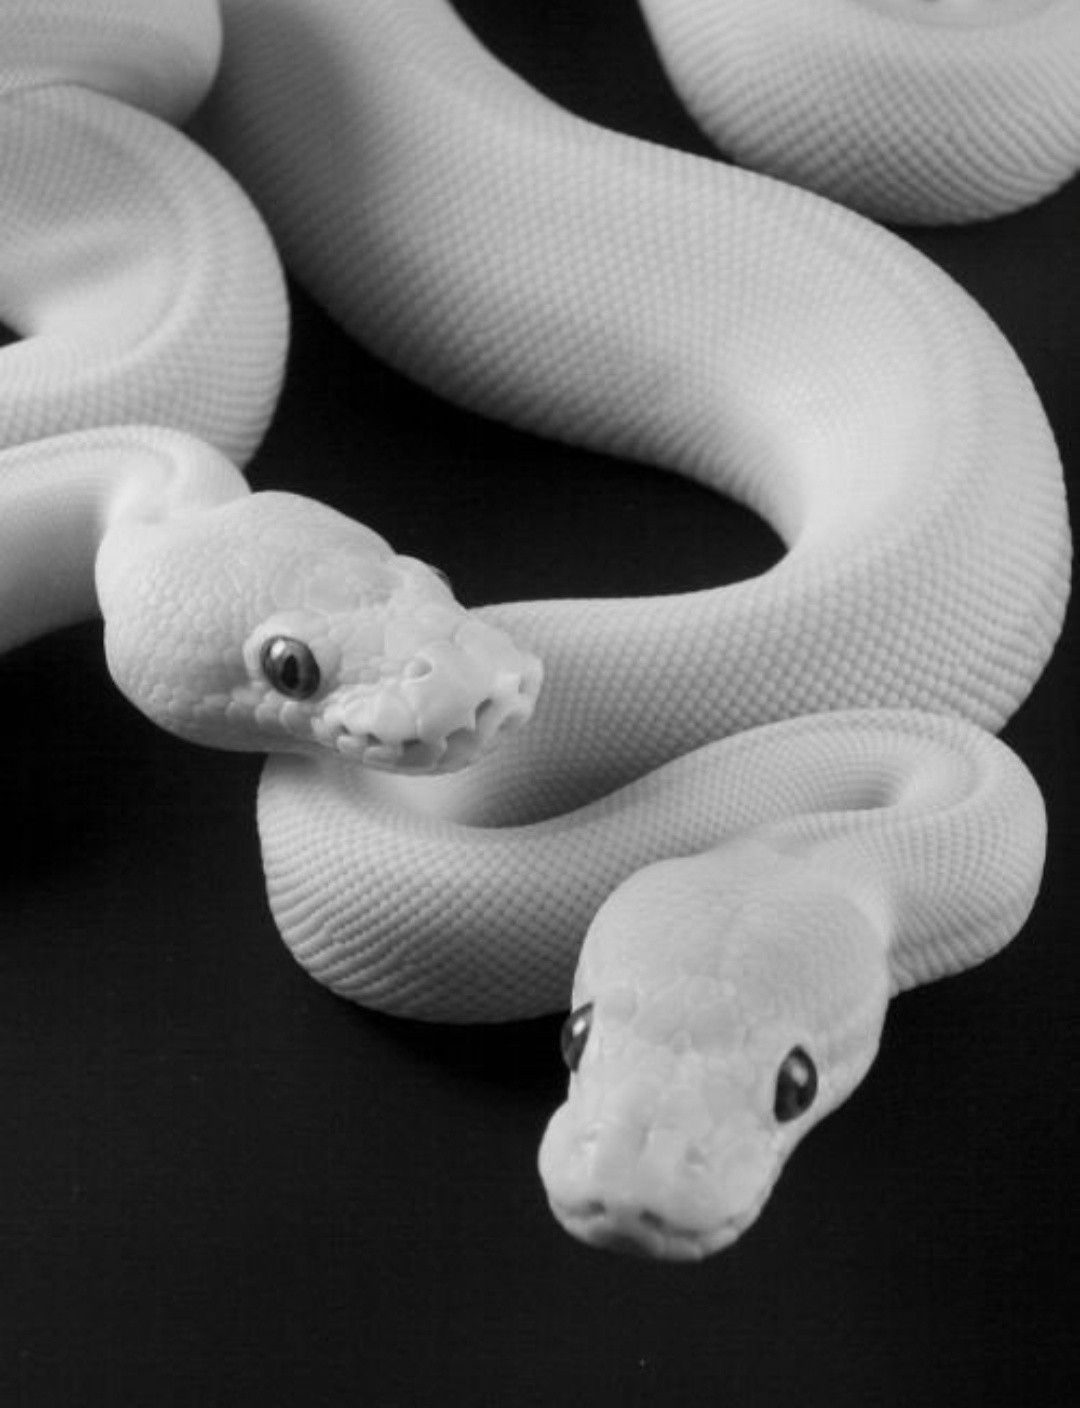 A two-headed snake is seen in this undated photo. - Snake